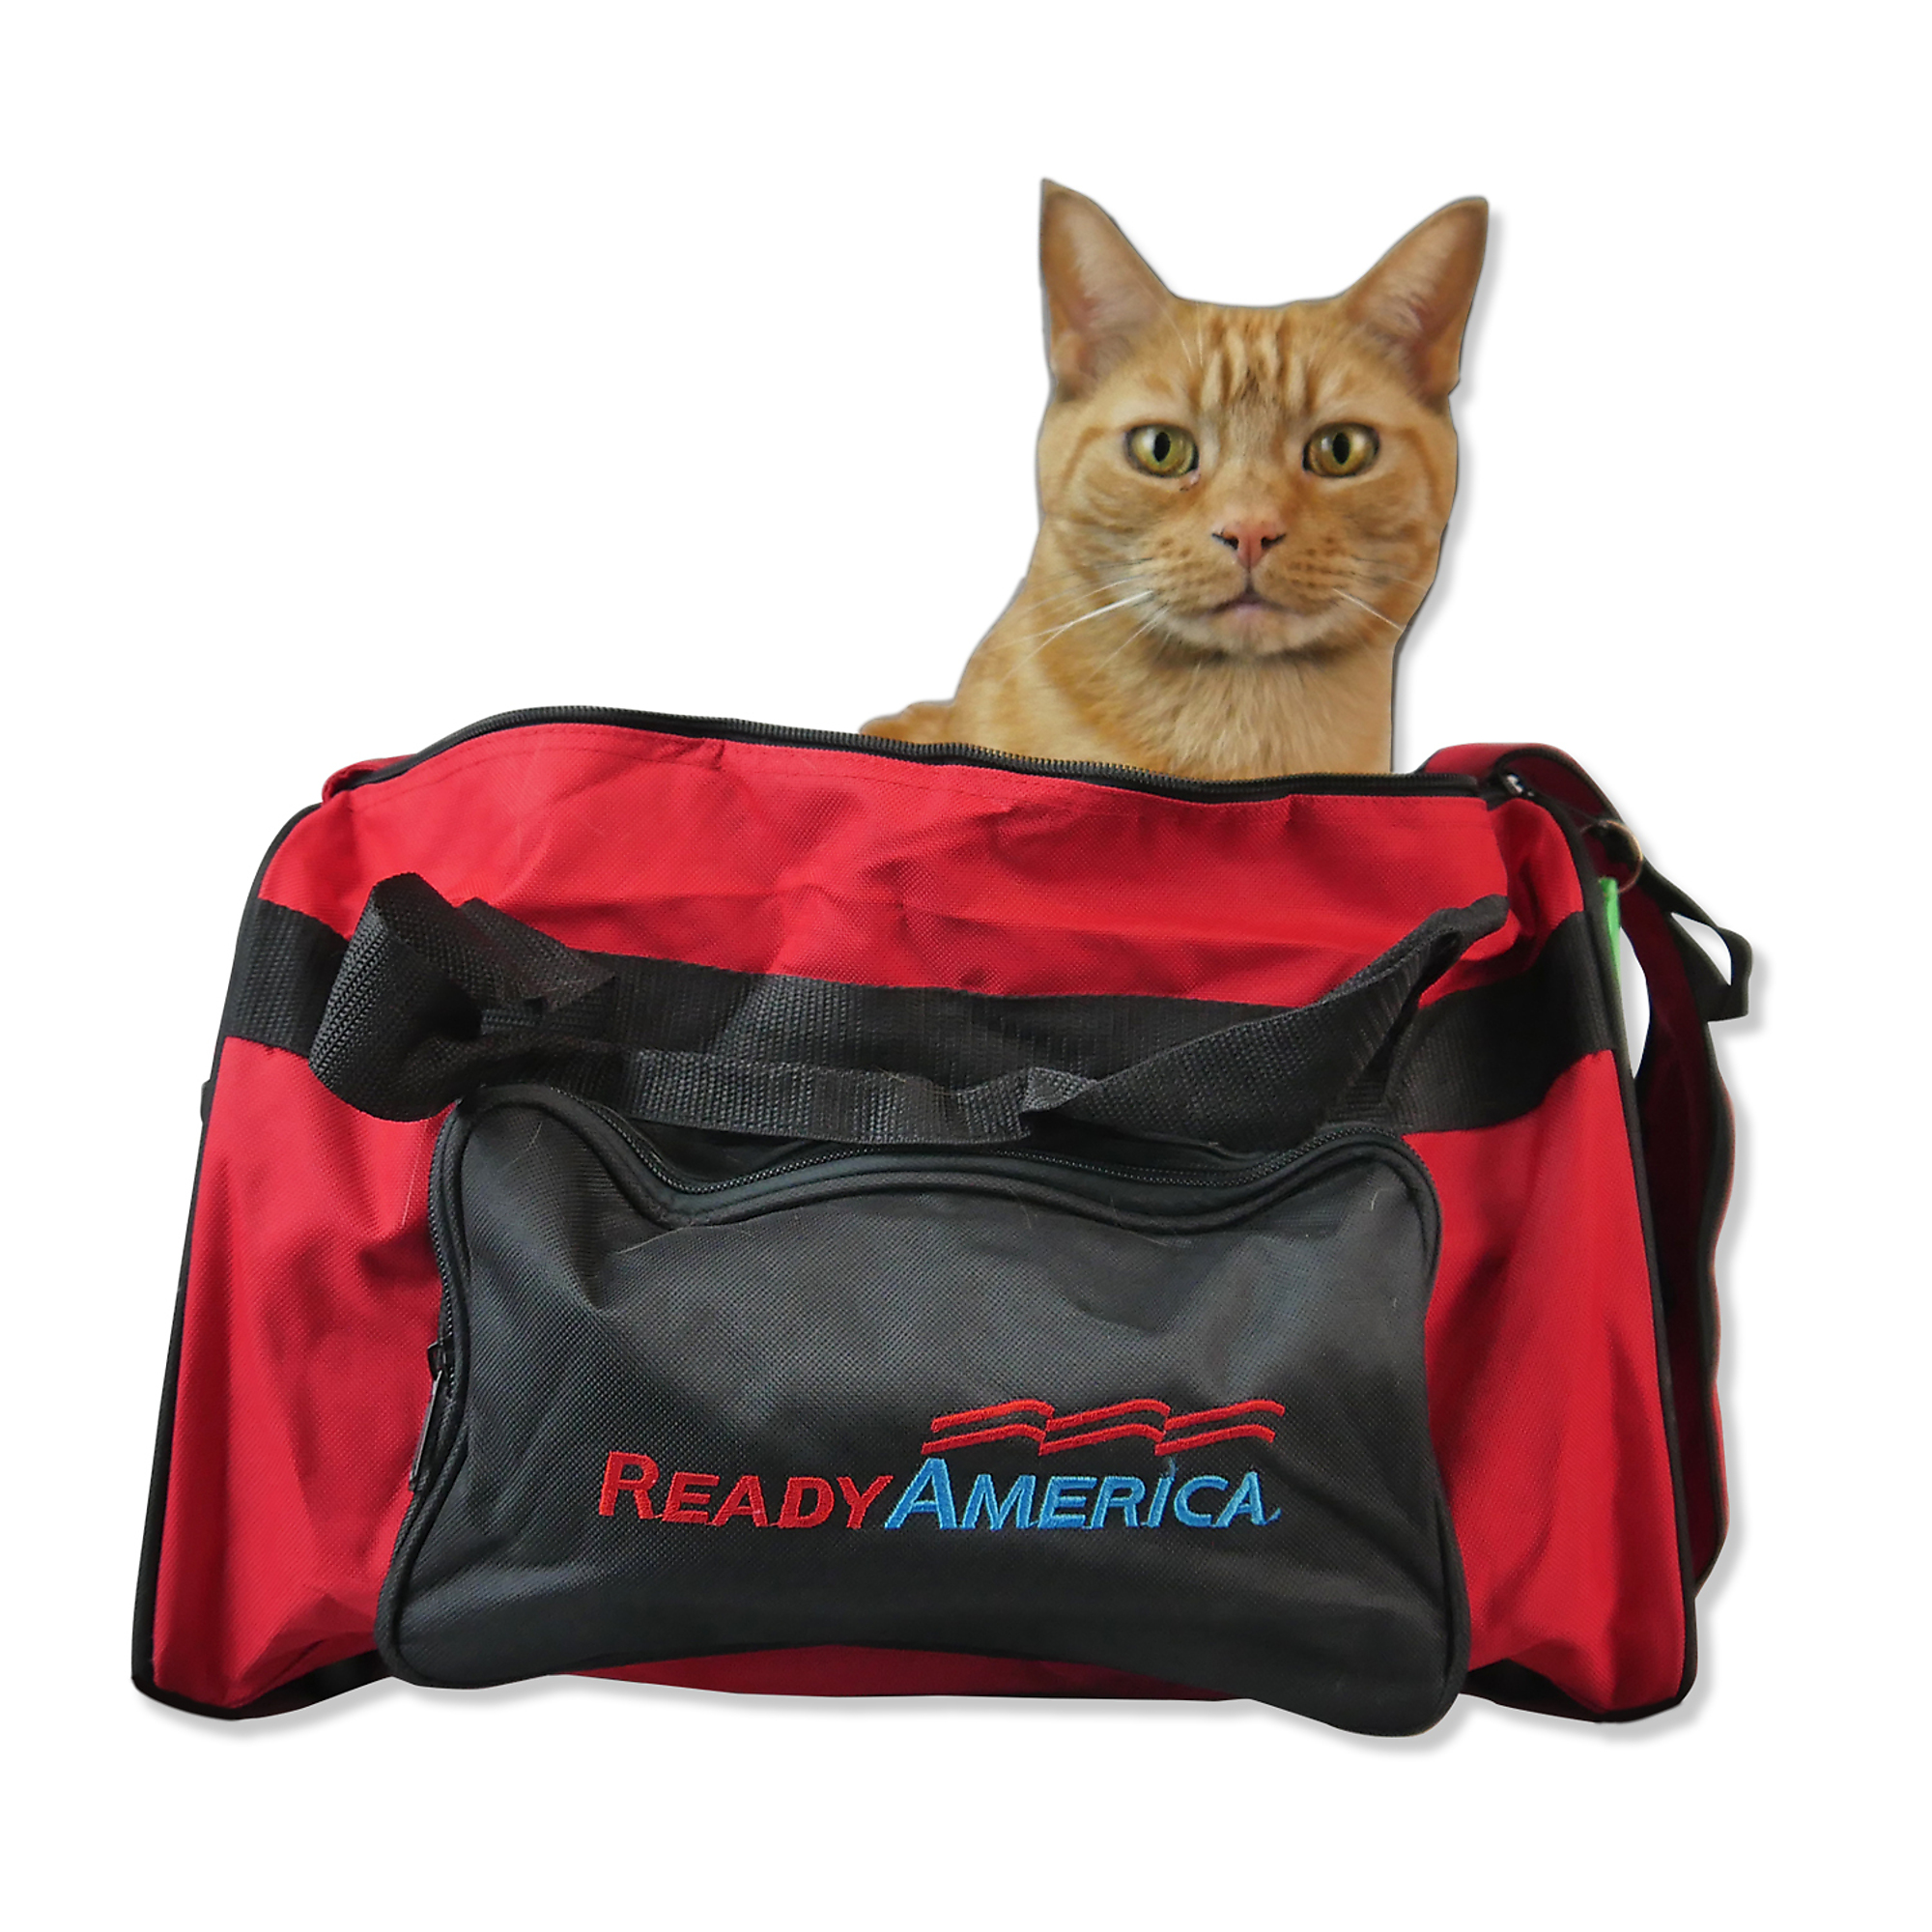 Ready America, 1 Cat, 3 Day, Evacuation Kit, Pieces (qty.) 20, Model 77100